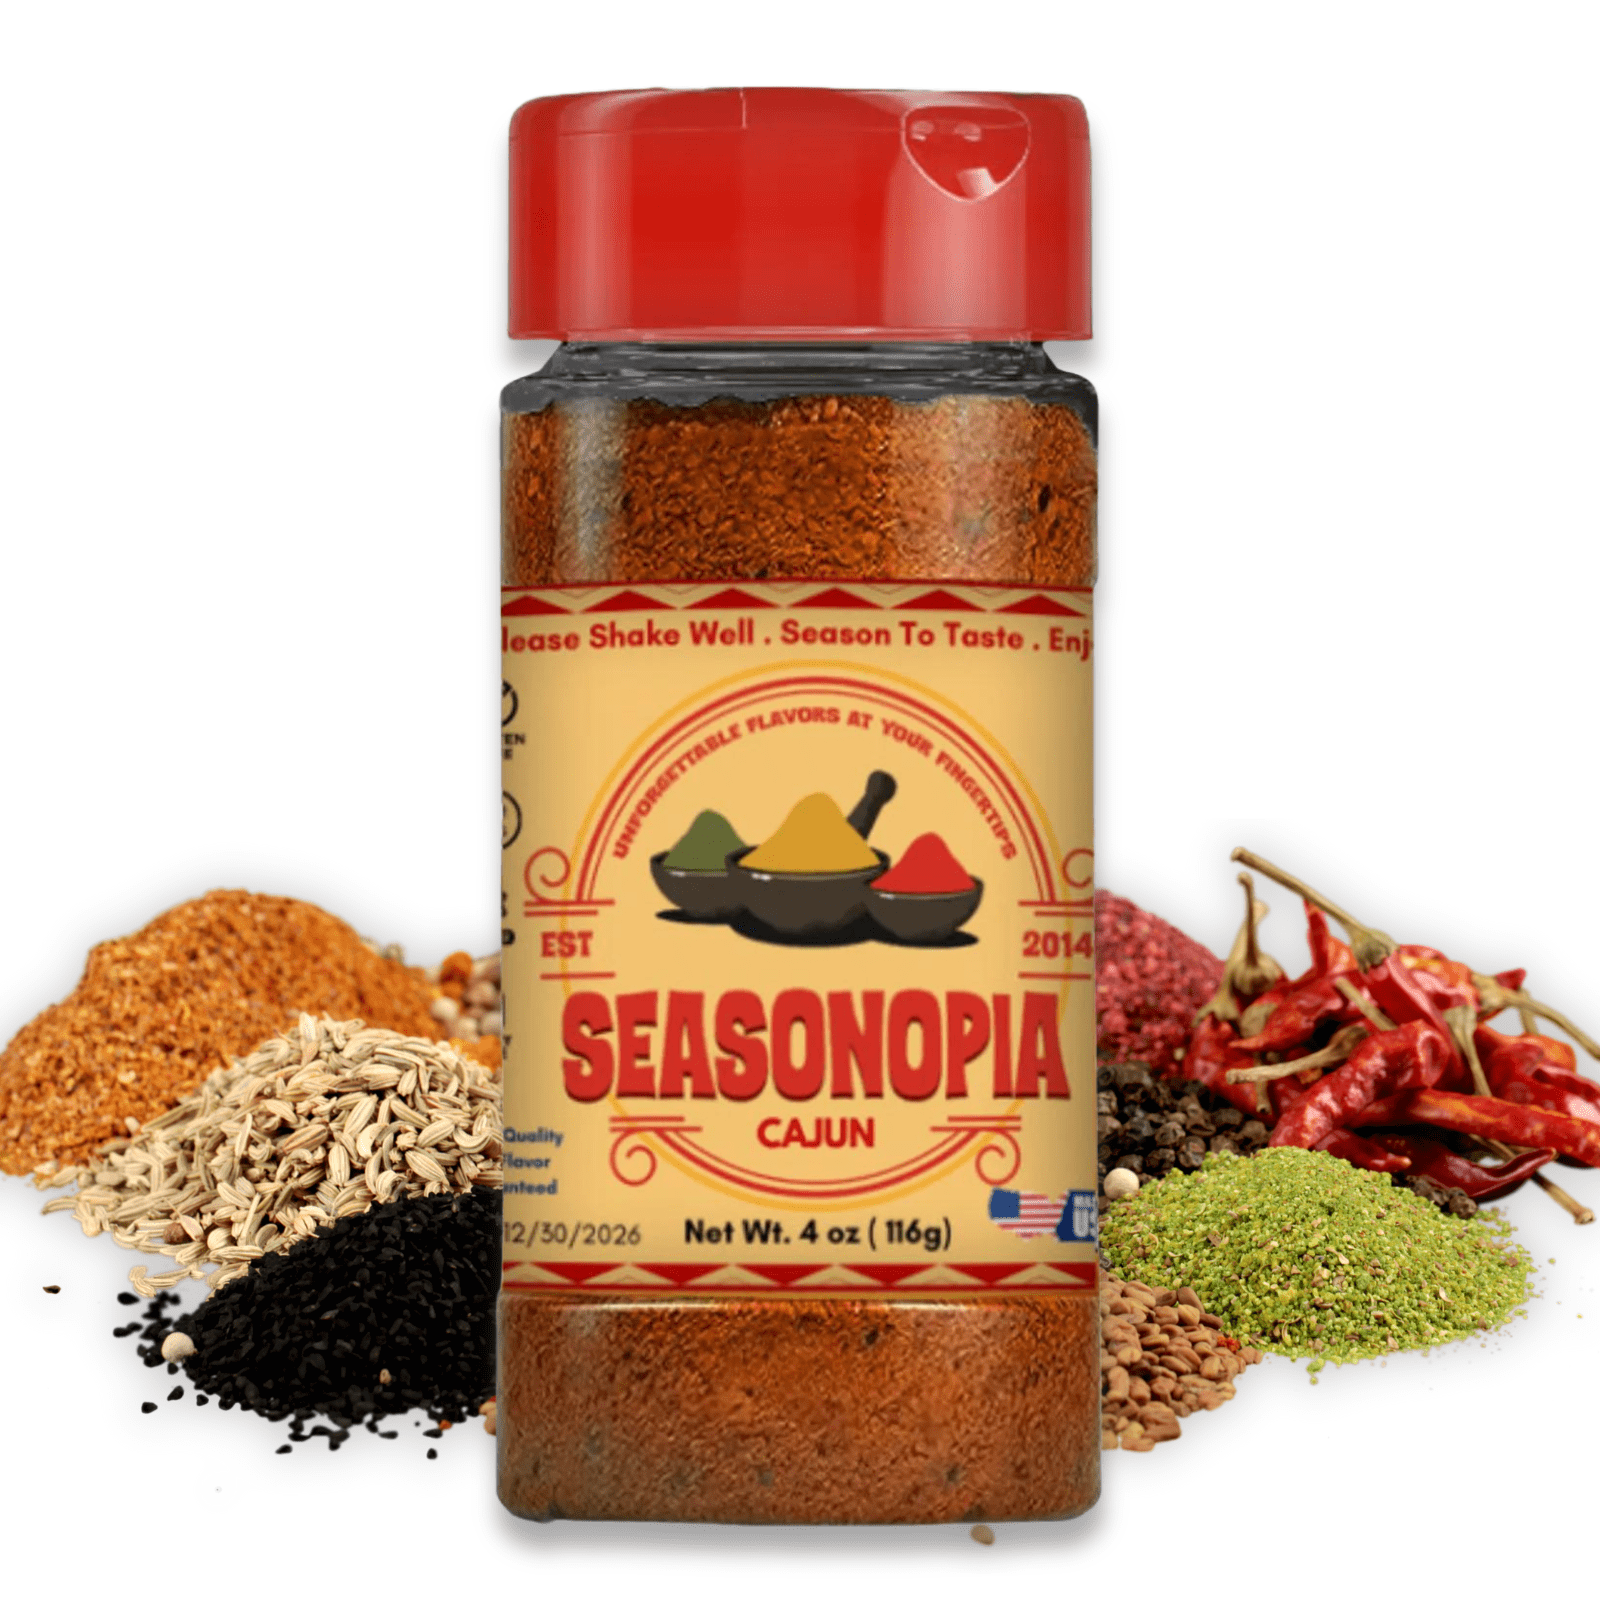  Just Spices Egg Topping, 1.94 OZ I Breakfast and egg seasoning  with white sesame, chilli, grated tomato, sea salt and more : Grocery &  Gourmet Food